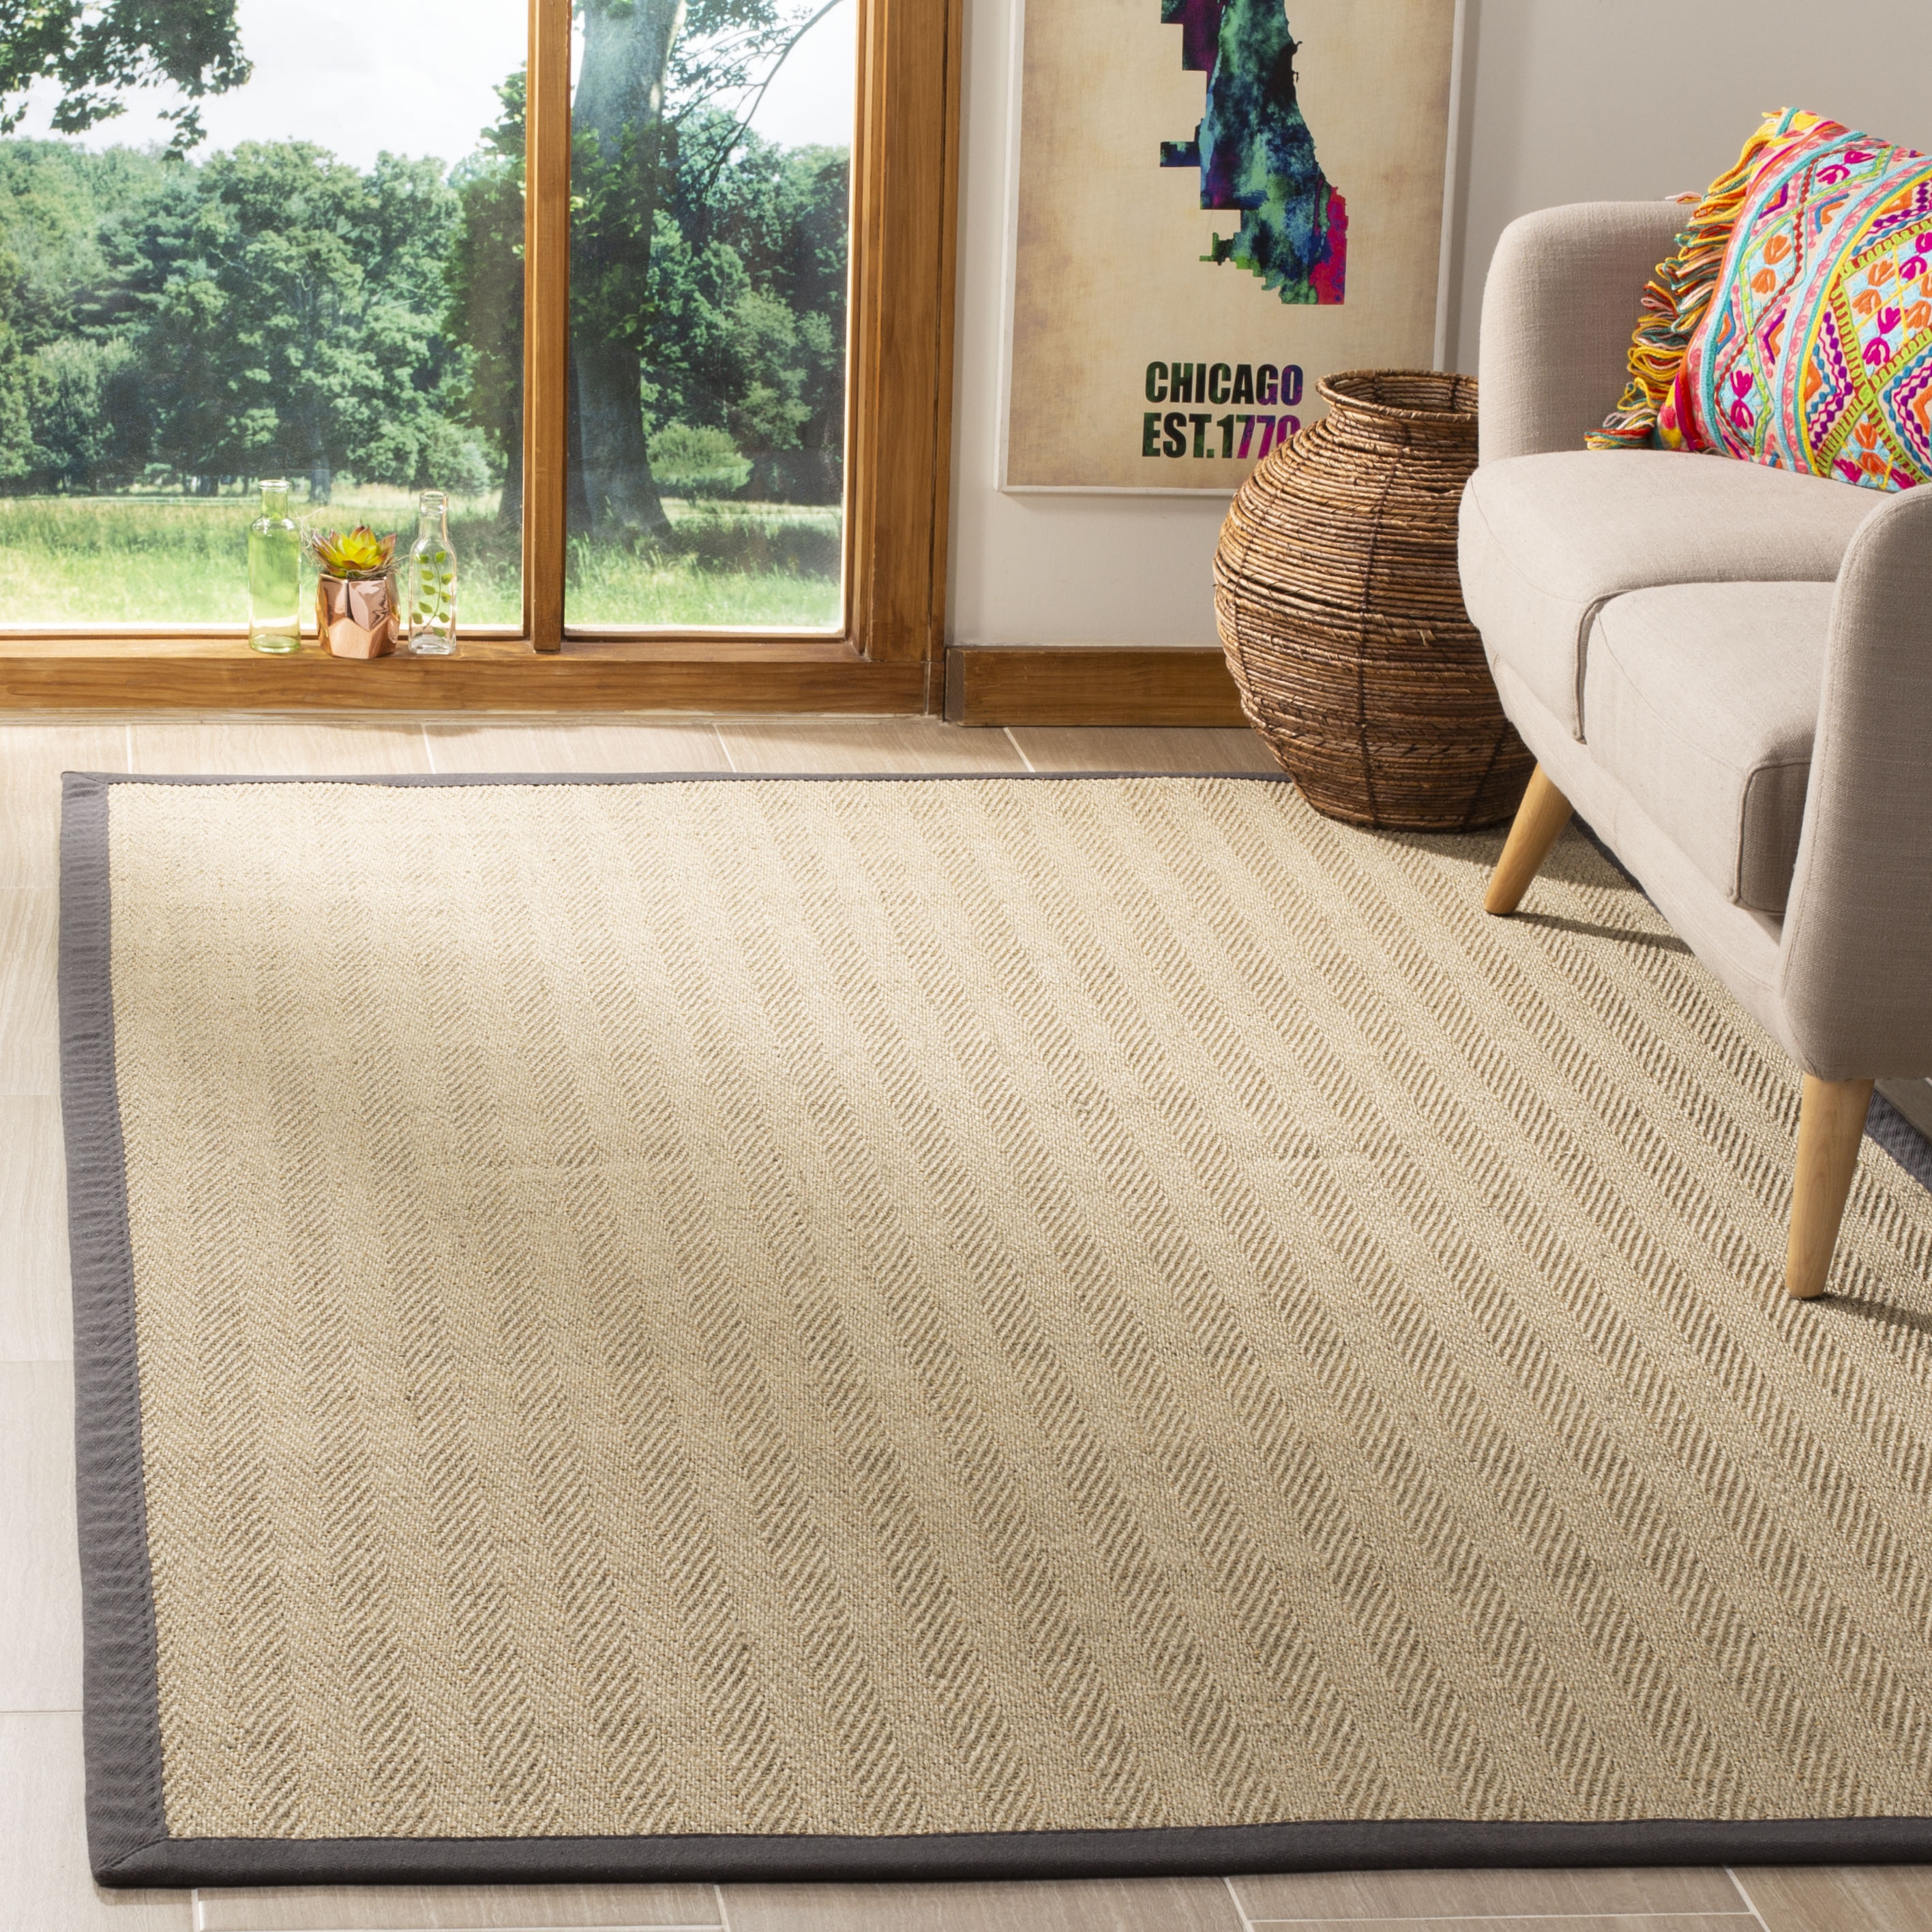 Arlo Home Woven Area Rug, NF134A, Natural/Grey,  6' X 9' - Image 1